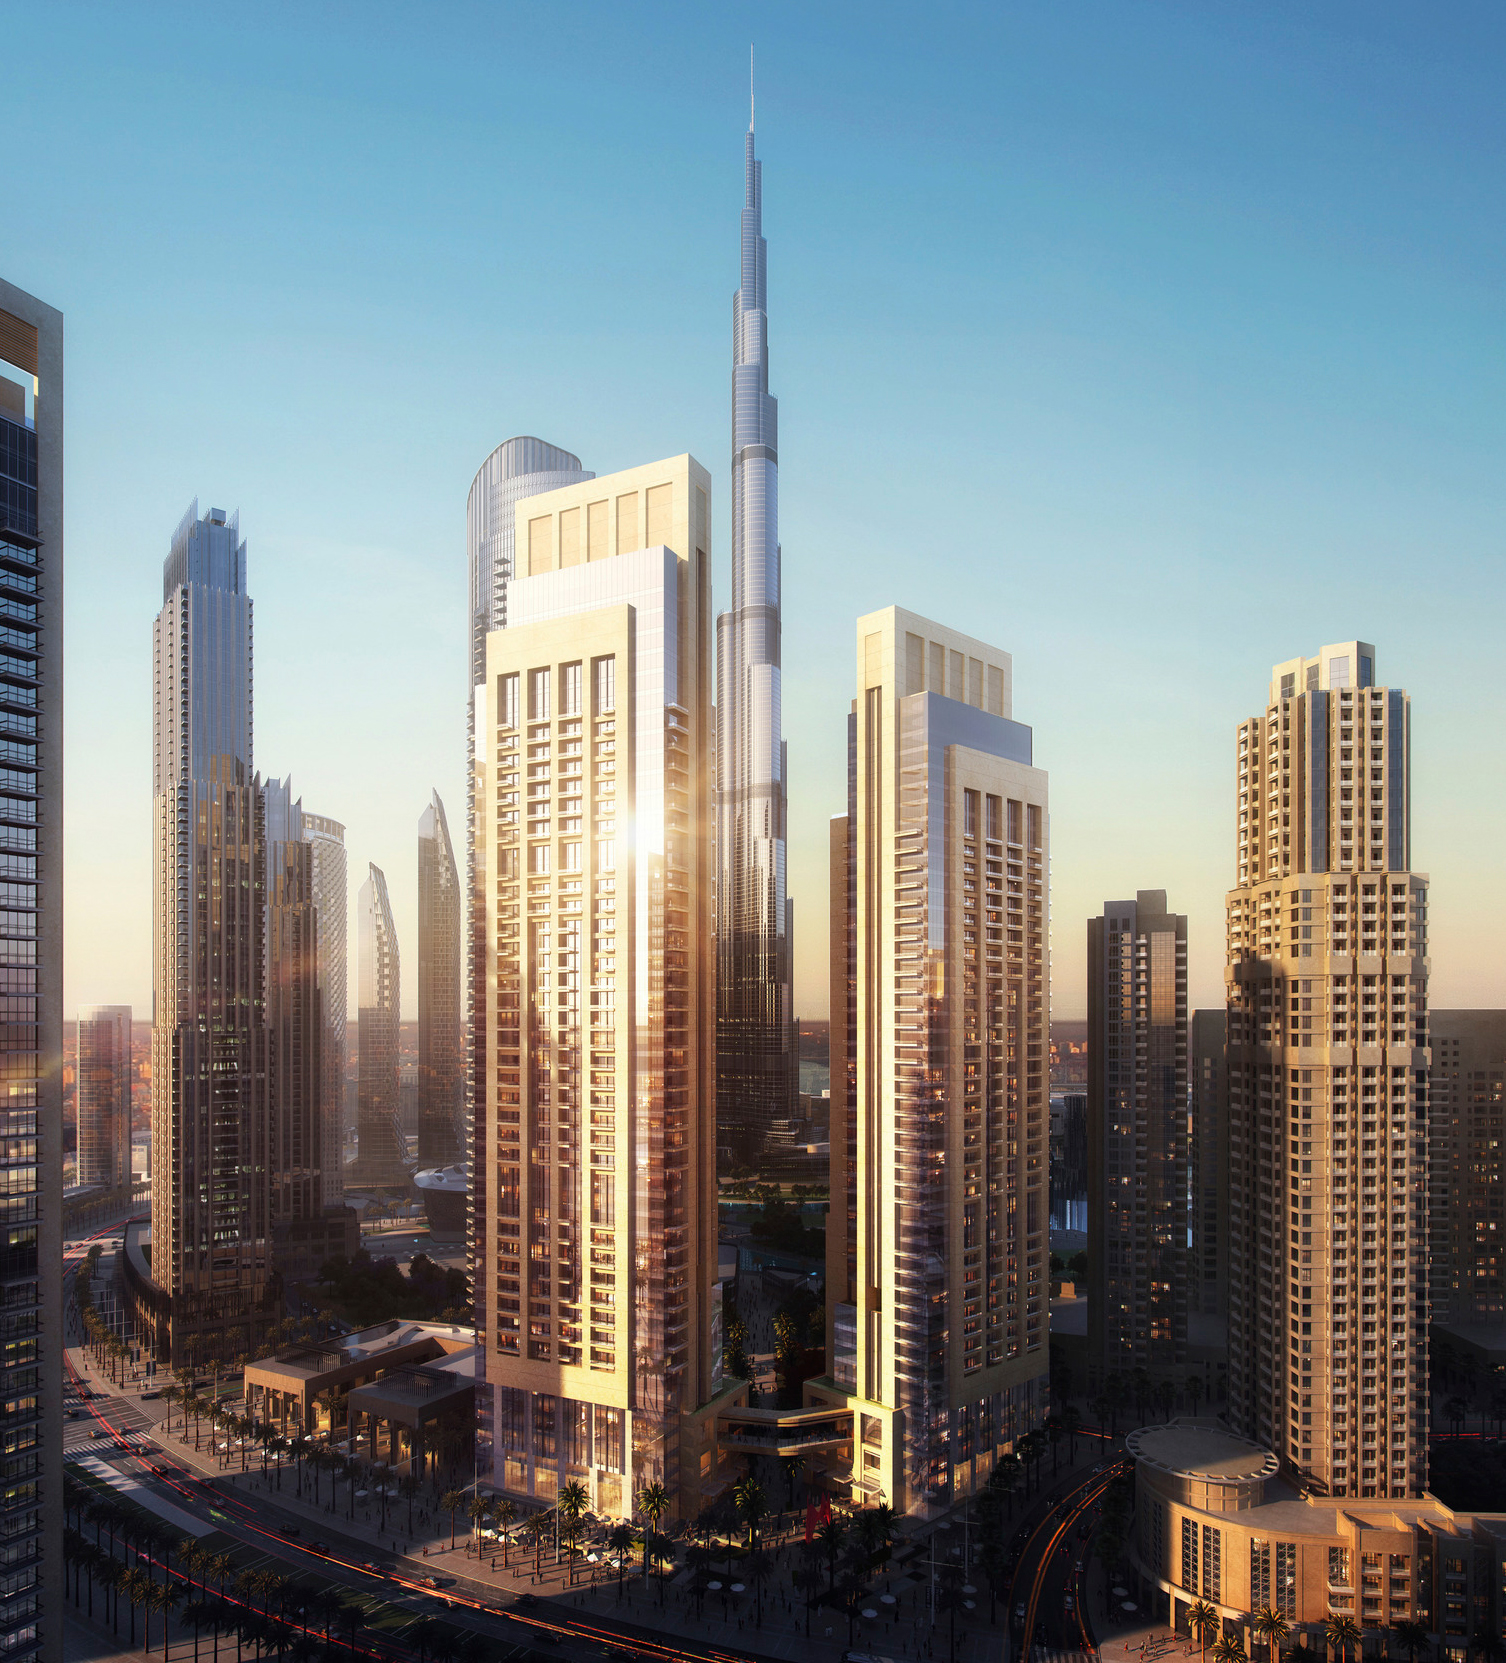 A two-tower residential complex in Dubai